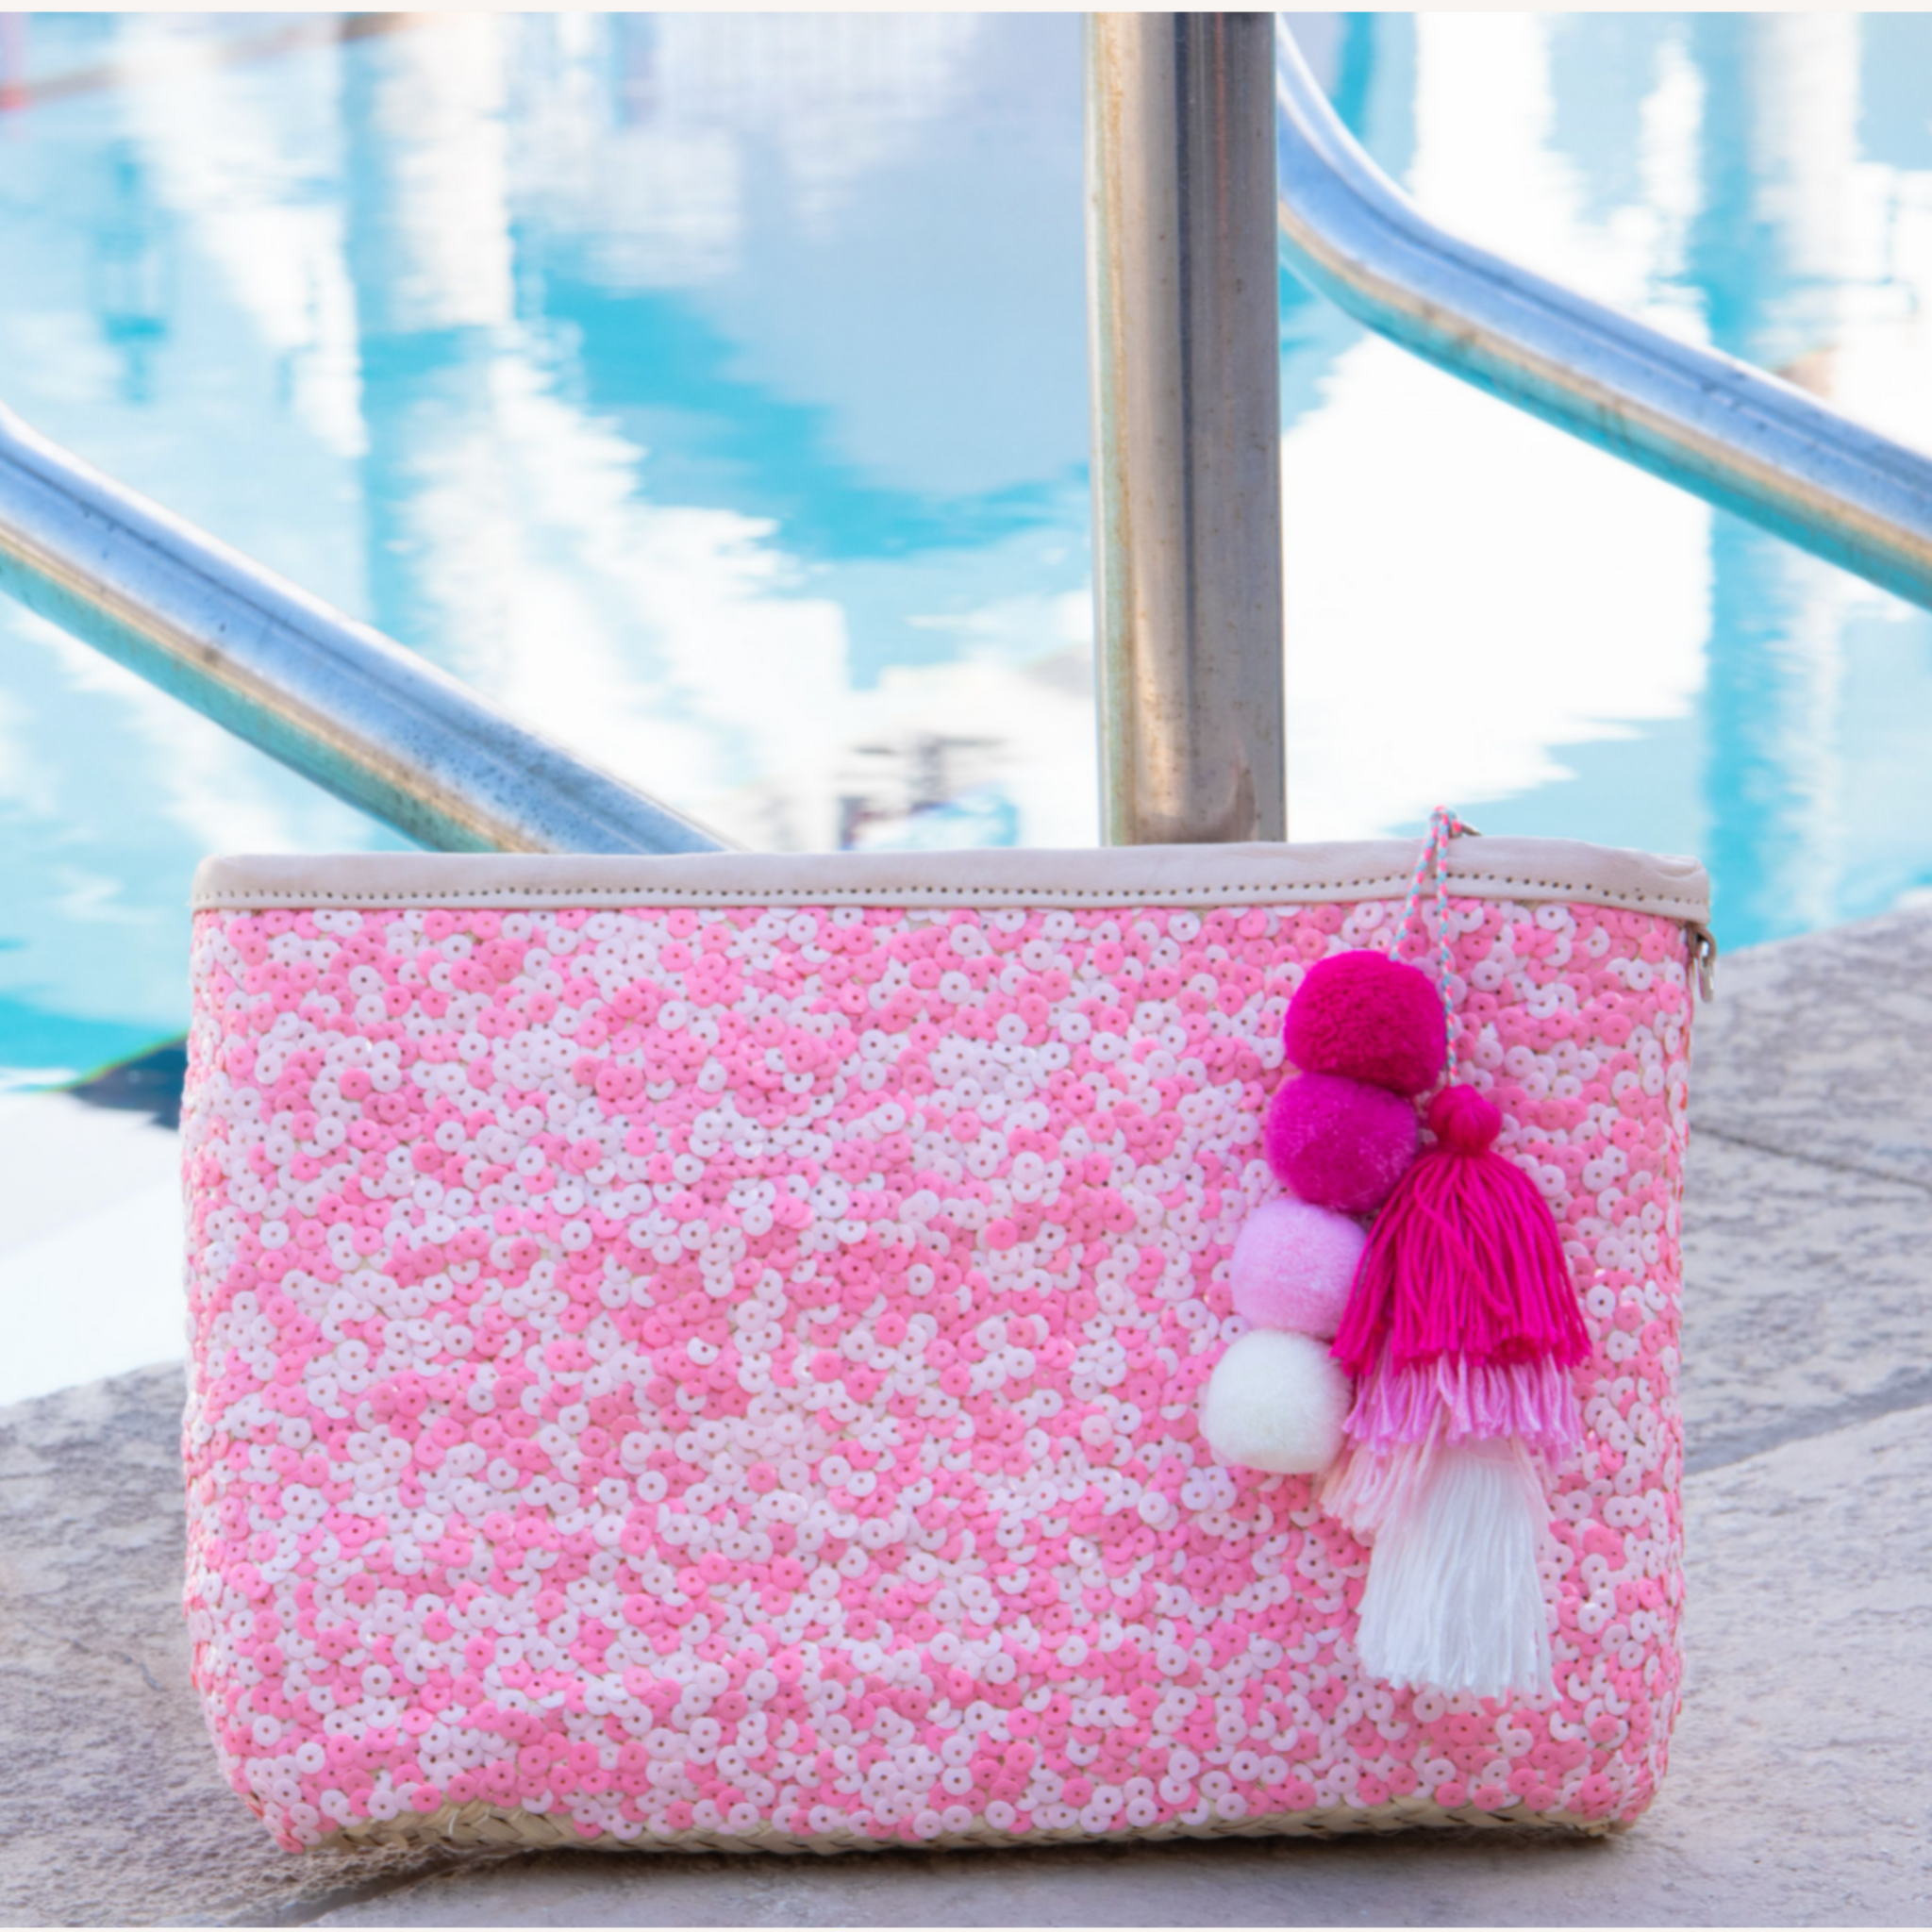 Straw clutch with pink sequins sitting next to pool